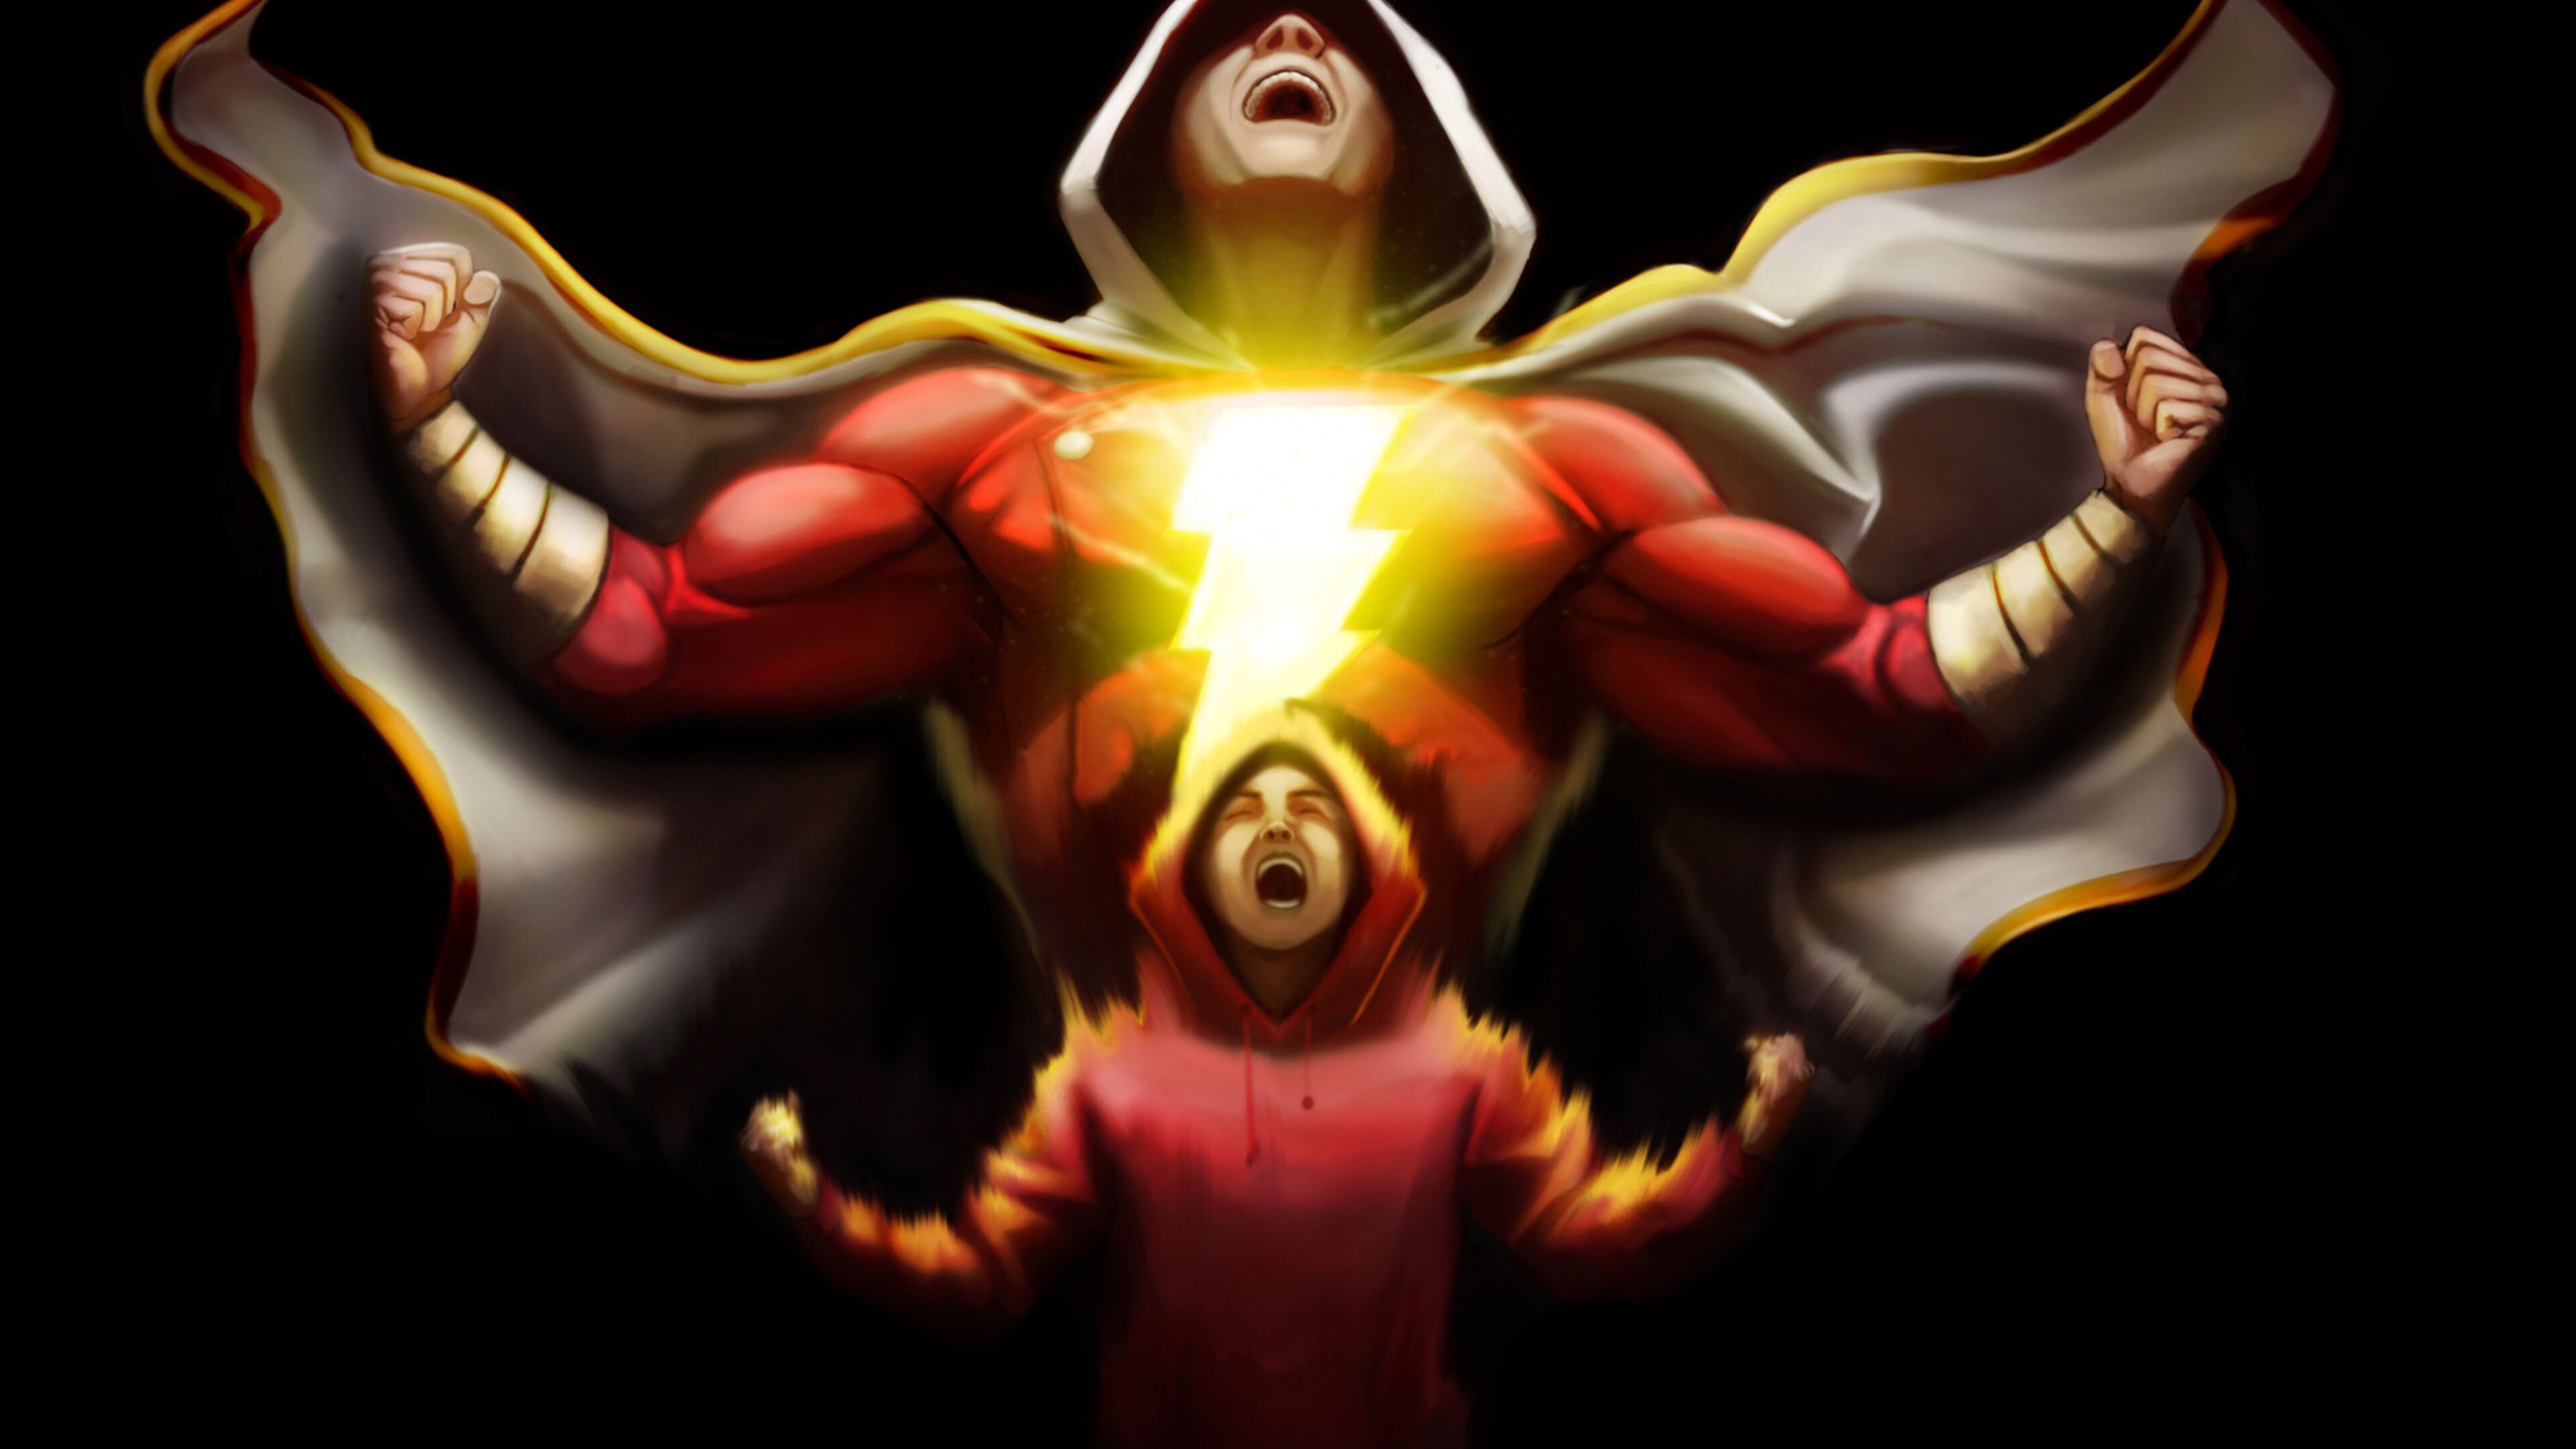 Shazam Wallpaper in 4K and Full HD That You Must Download